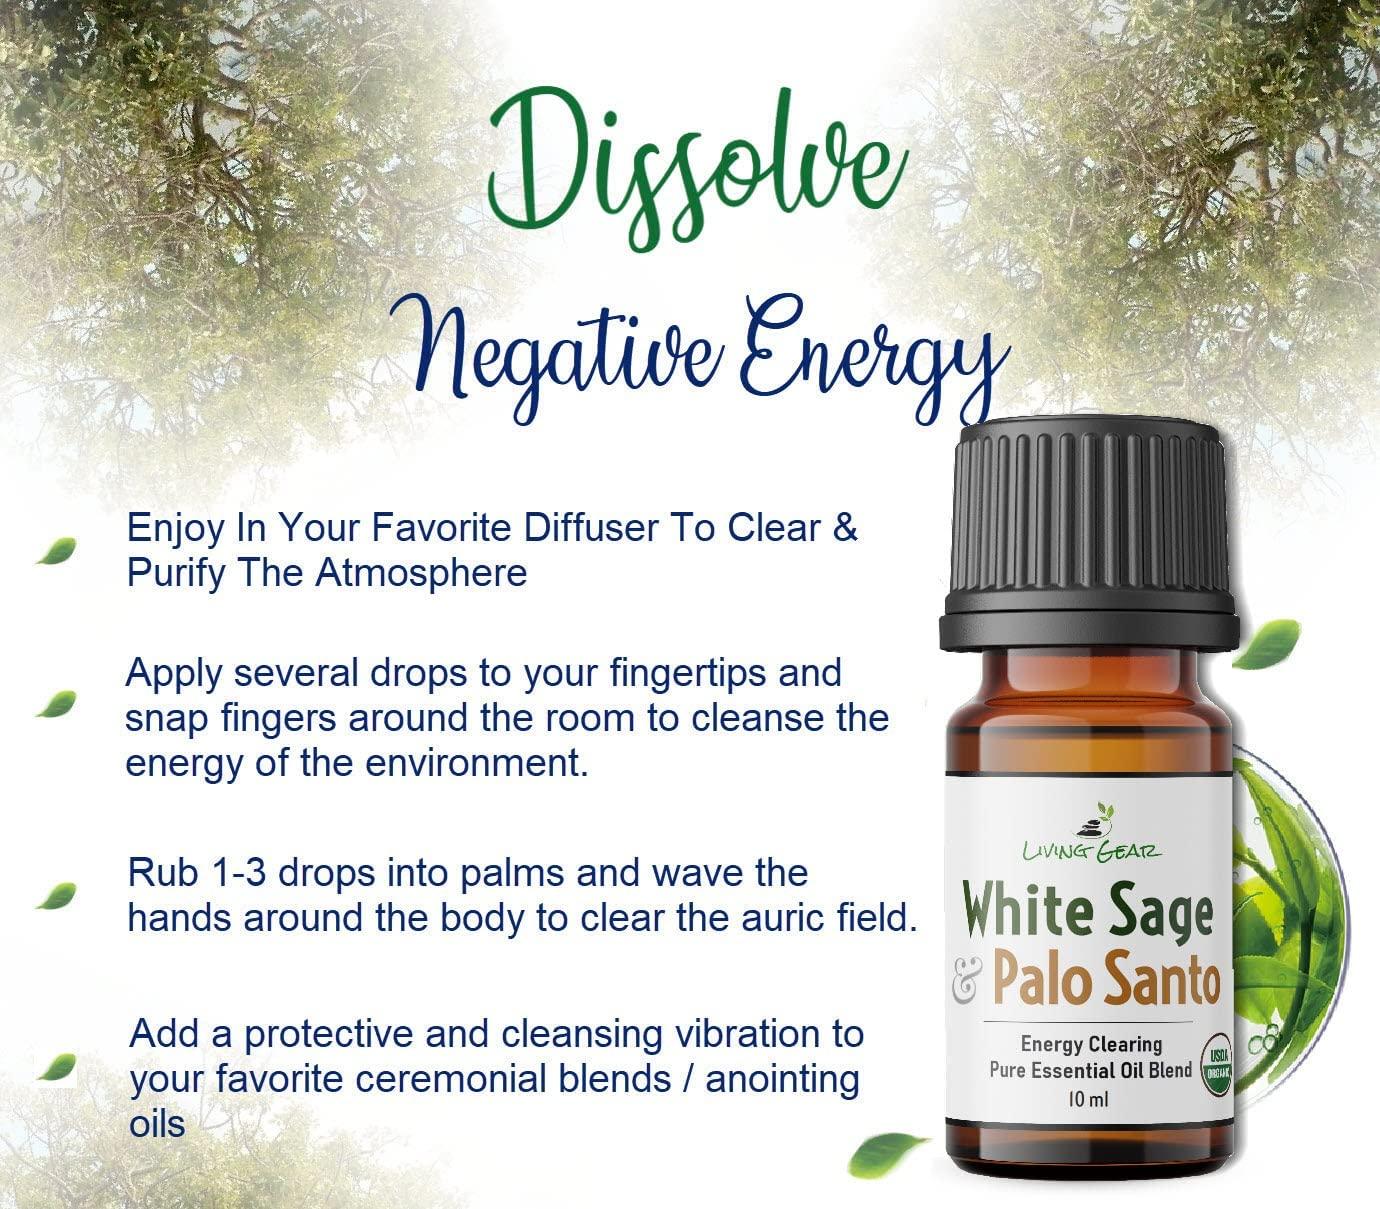 White Sage & Palo Santo Purification Essential Oil - Clears Negative Energy  - for Diffusers, Meditation, Yoga & All Spiritual Purposes - A Smoke-Free  Alternative to Burning Sage -10ml